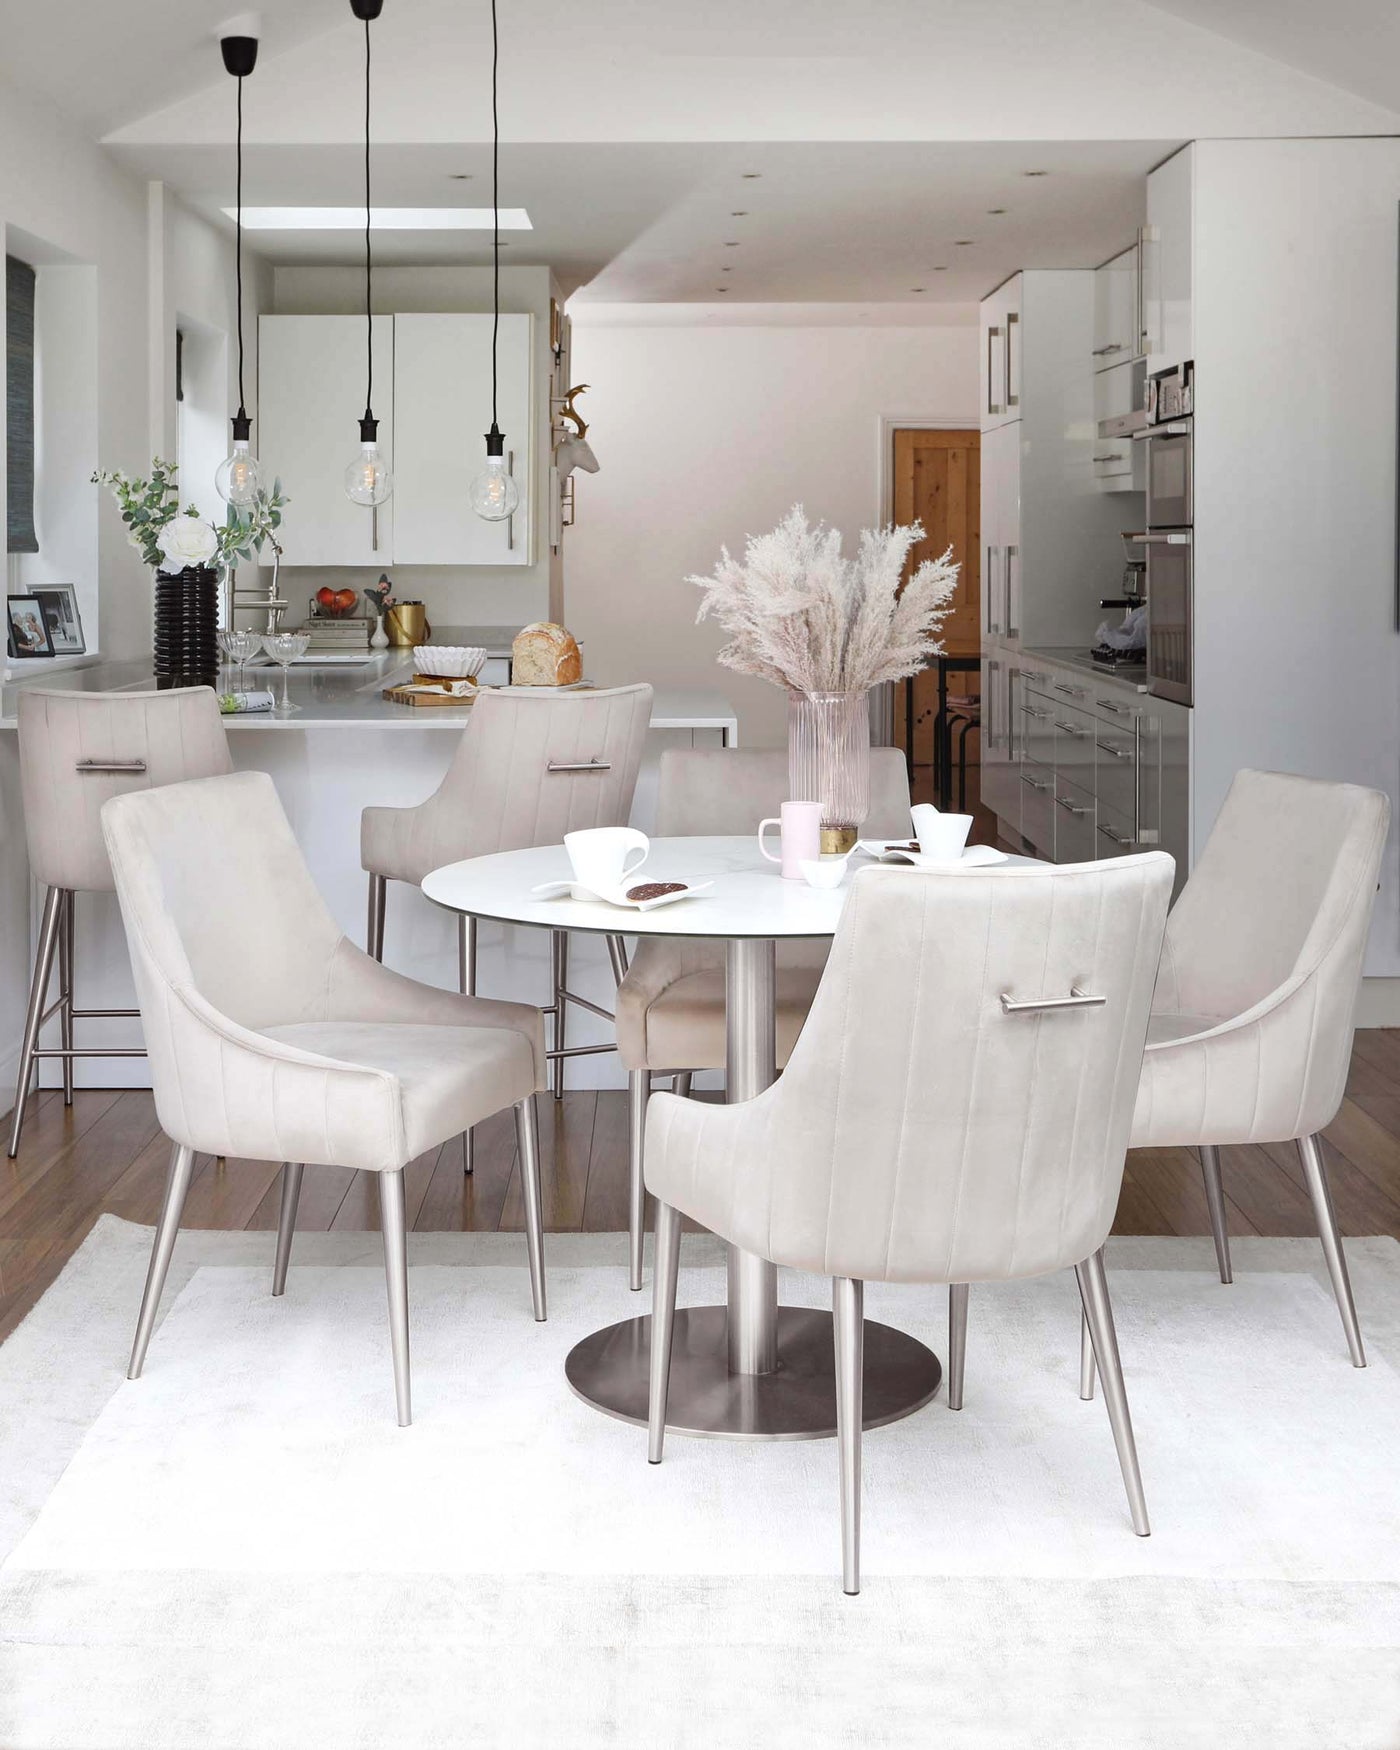 The image features a contemporary dining set consisting of a round, white table with a polished metal base, surrounded by four plush, velvet upholstered chairs in a light beige hue with sleek metal legs. The set is arranged on a soft, textured off-white area rug, complementing the modern and minimalist aesthetic of the space.